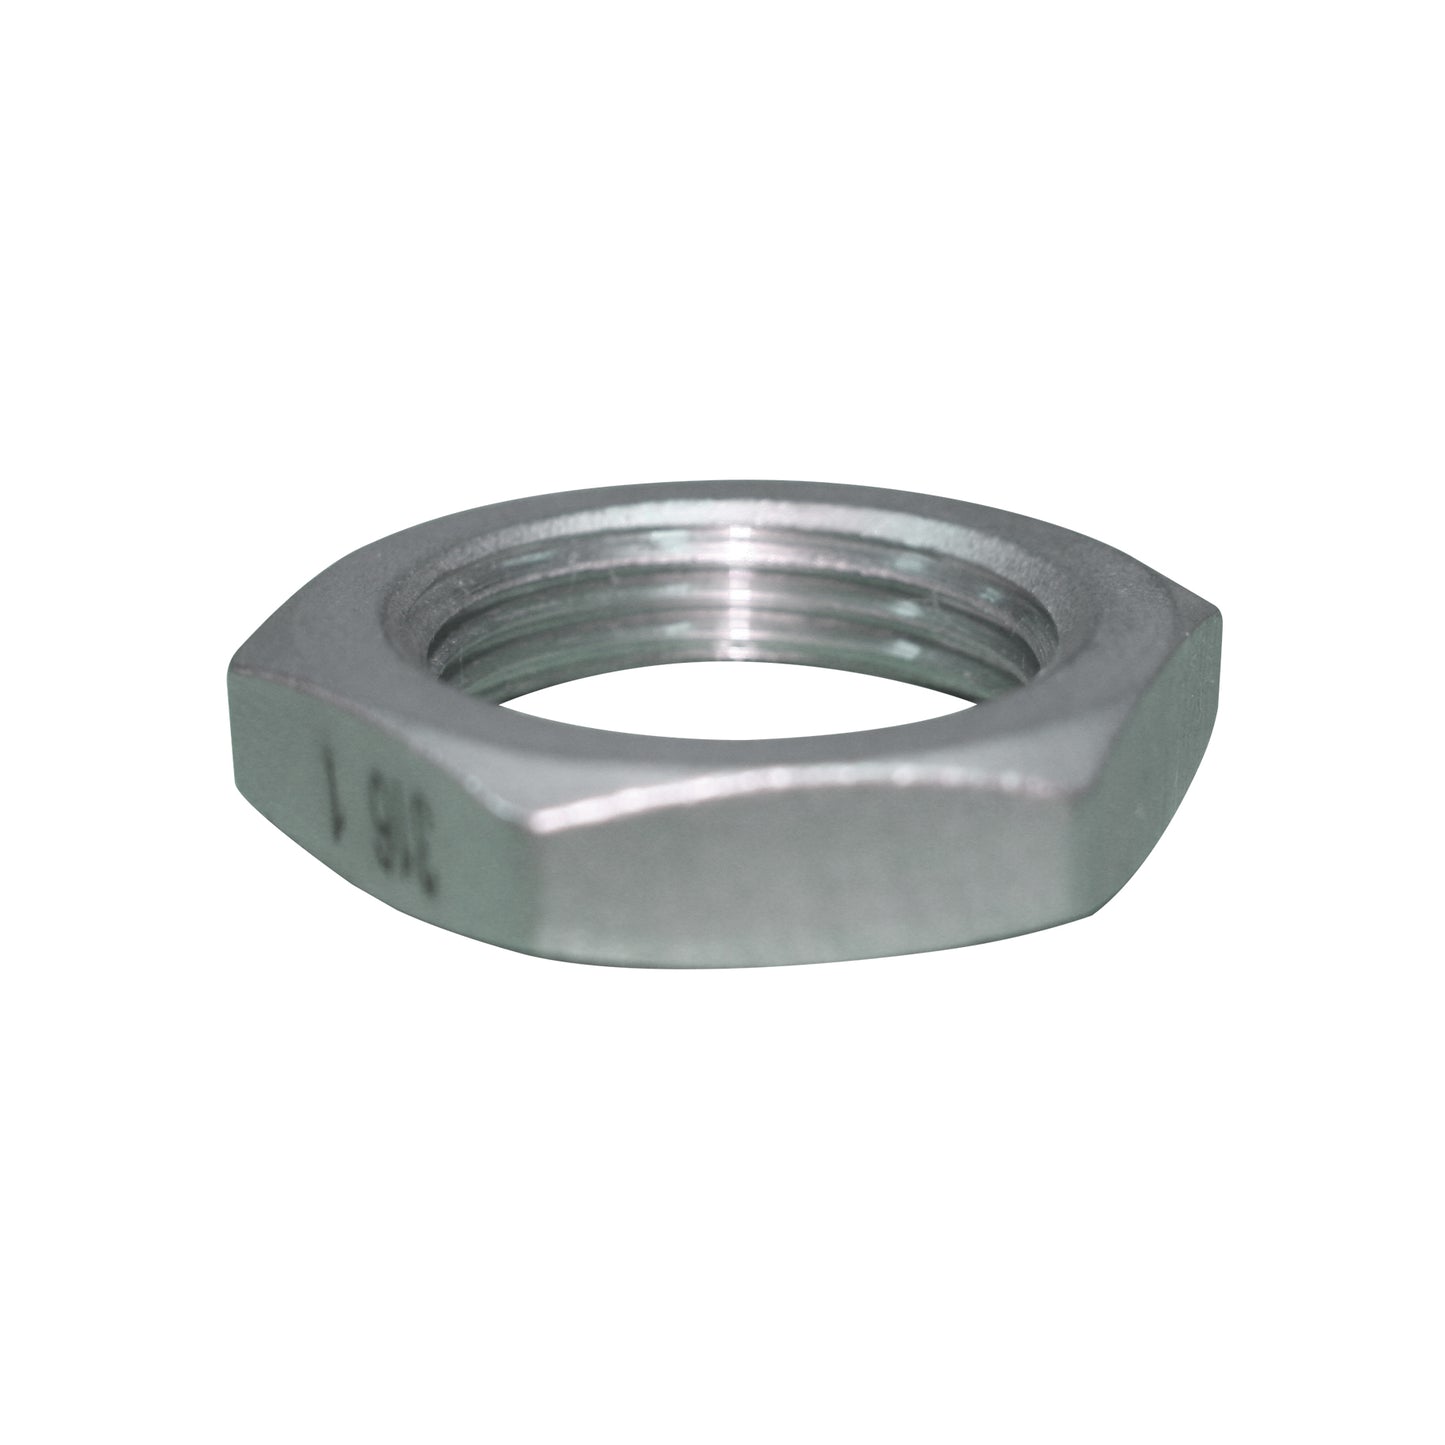 3/4" Stainless Steel Back Nut. SS150